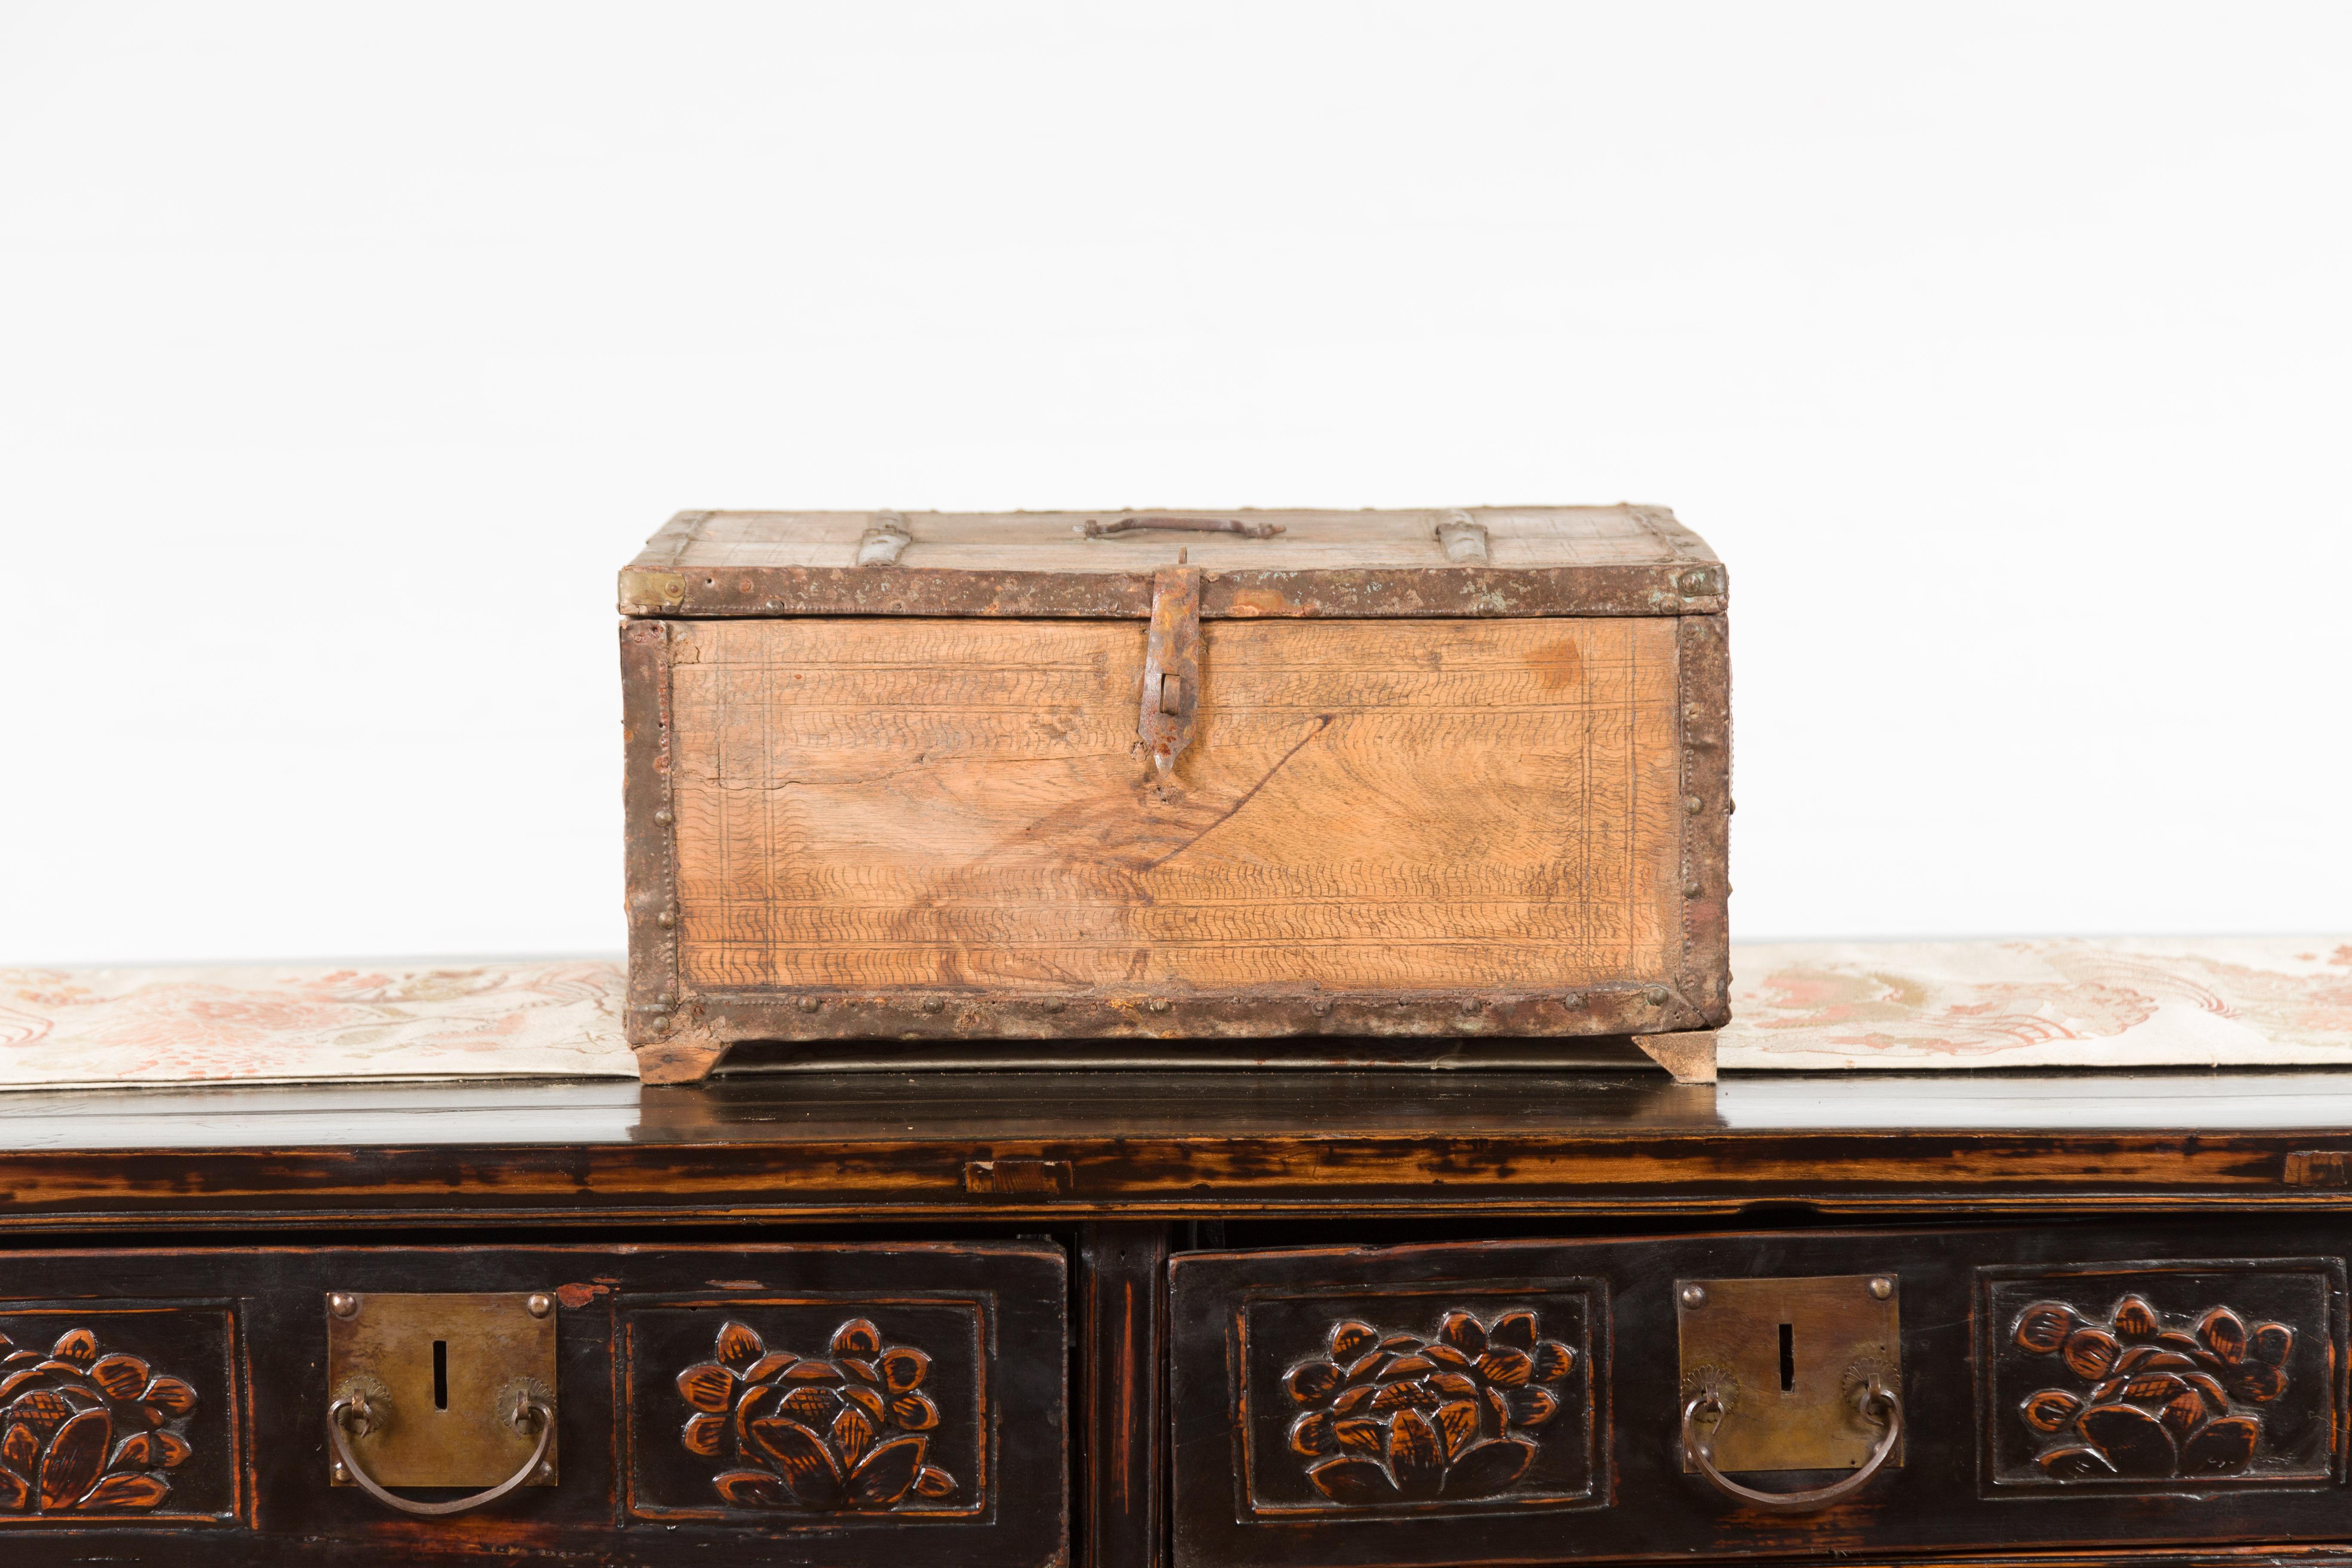 Rustic Indian 19th Century Wooden Box with Iron Details and Incised Motifs In Good Condition For Sale In Yonkers, NY